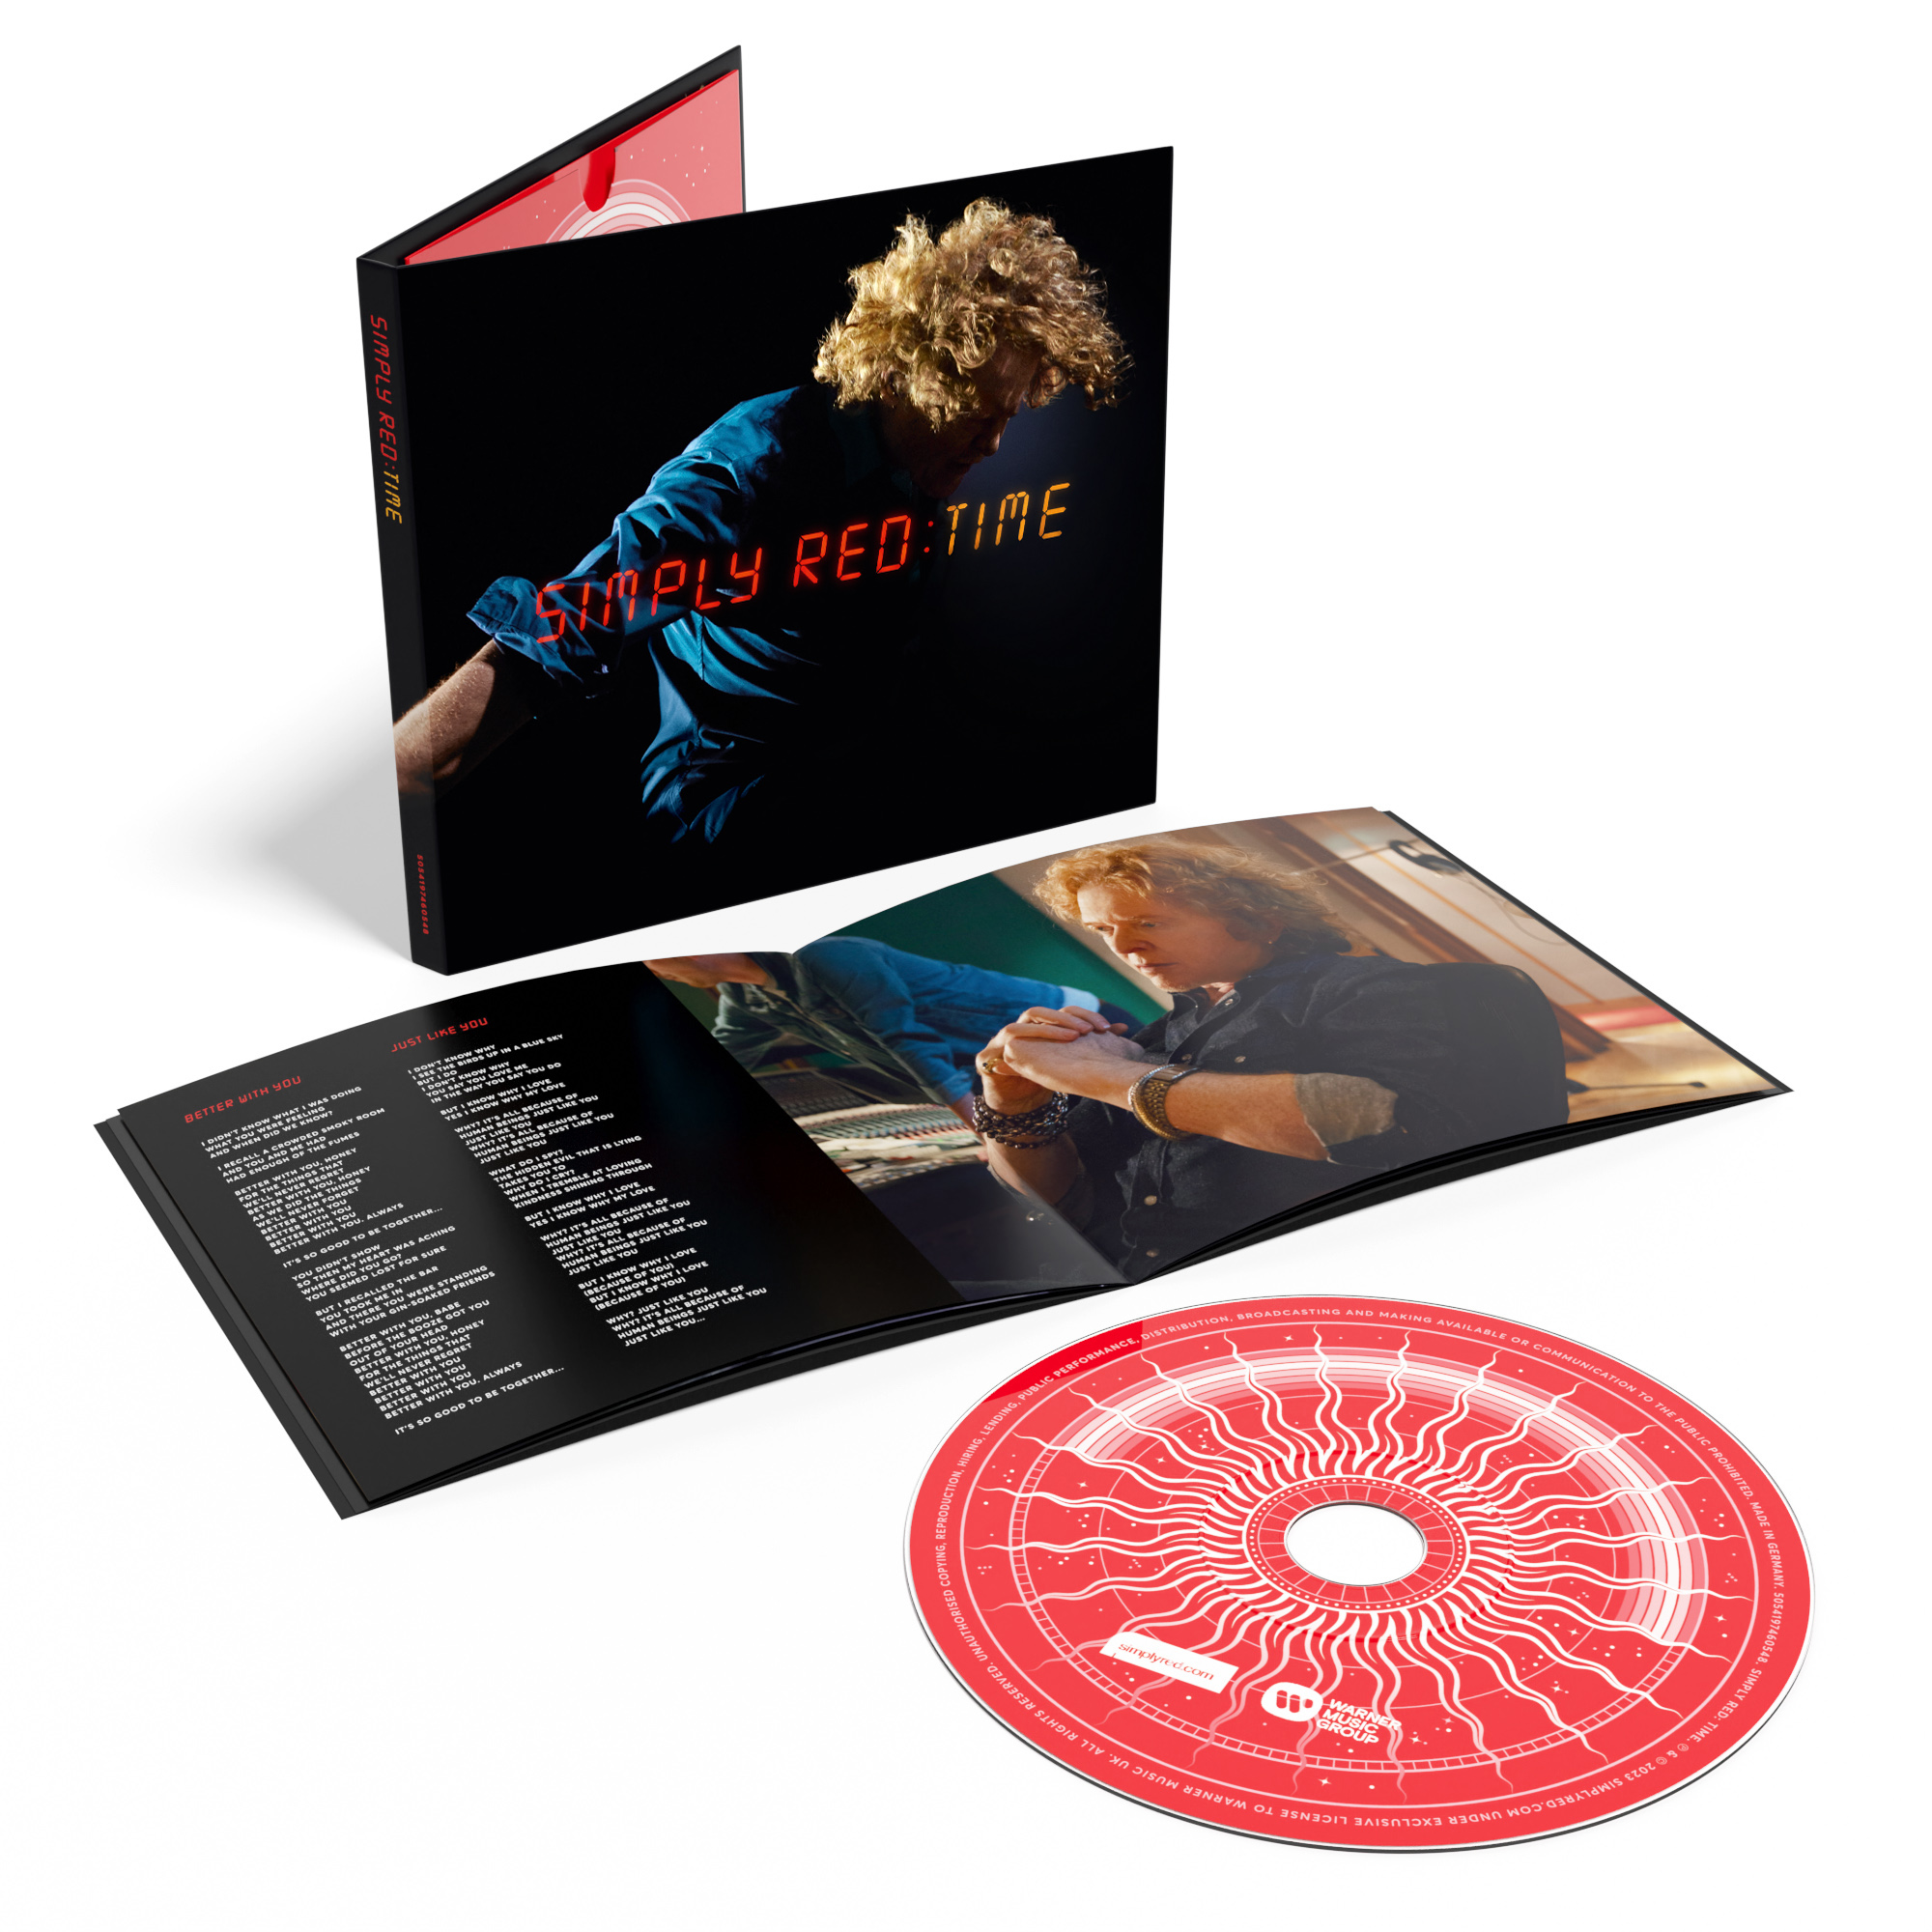 Simply Red - - TIME (CD)